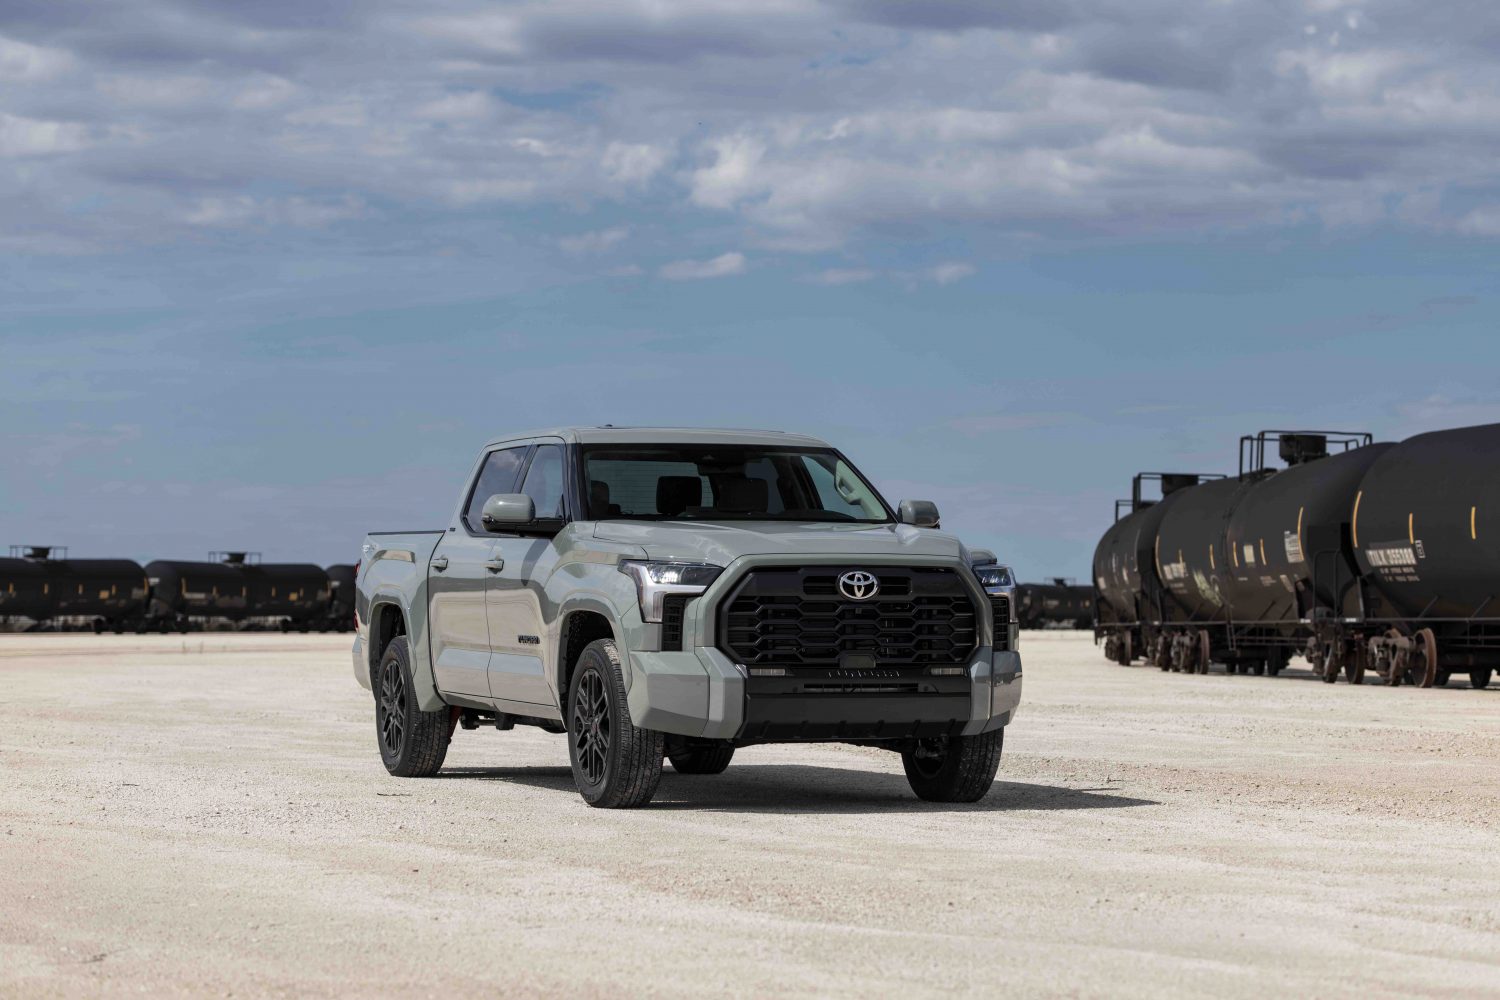 This is a gray Tundra. The Toyota Tundra price is lower for models for trims such as this SR5 | Toyota